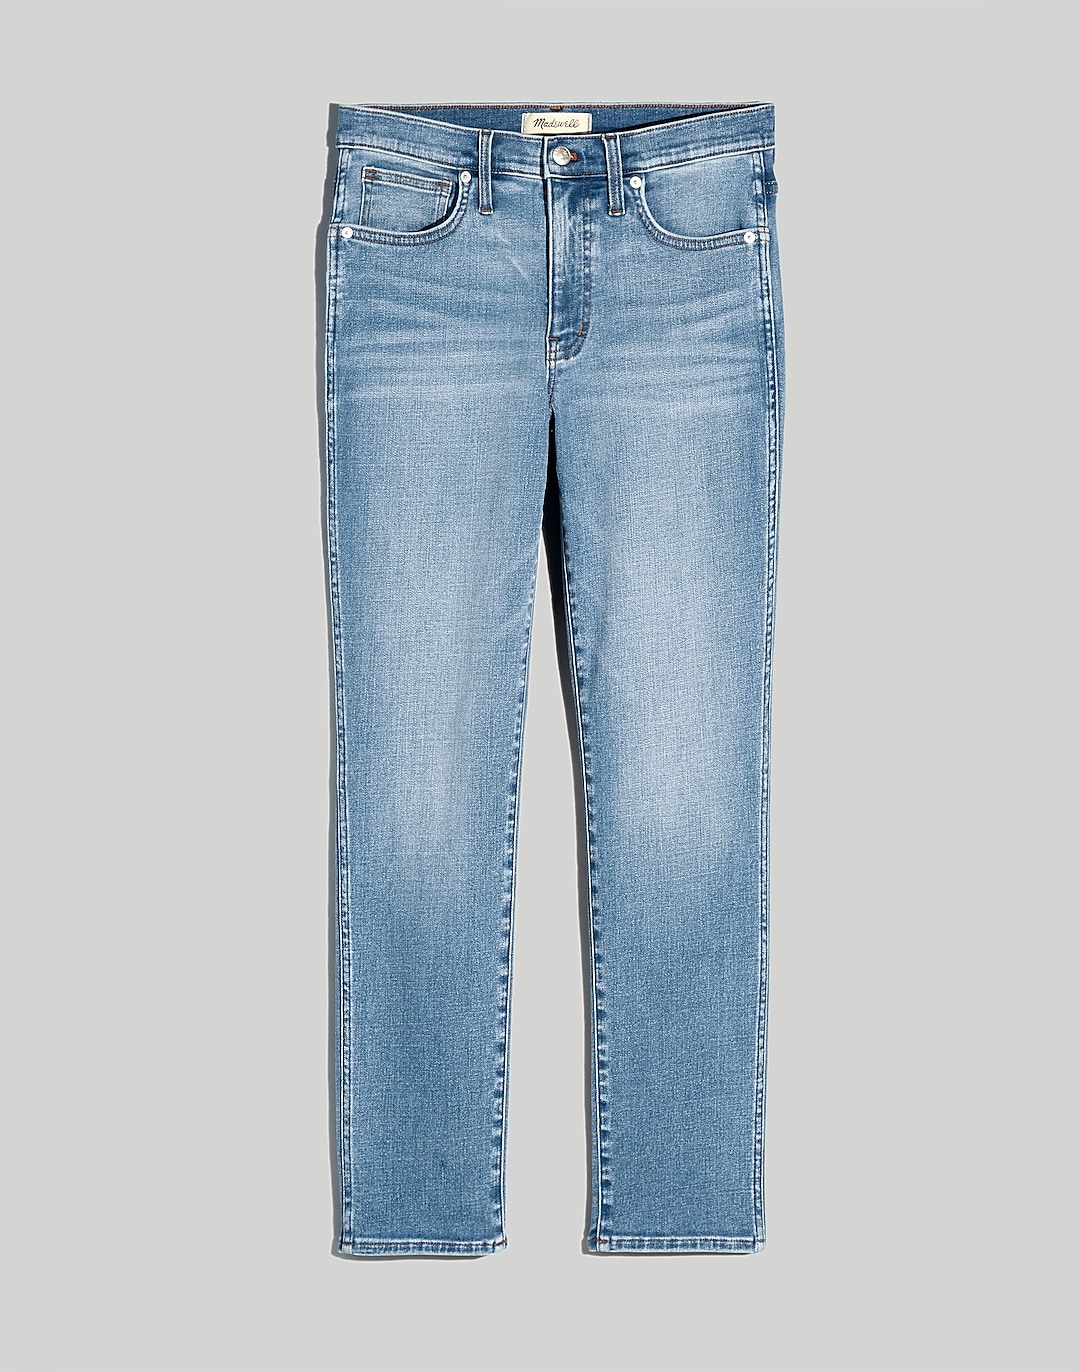 Mid-Rise Stovepipe Jeans in Skyford Wash | Madewell